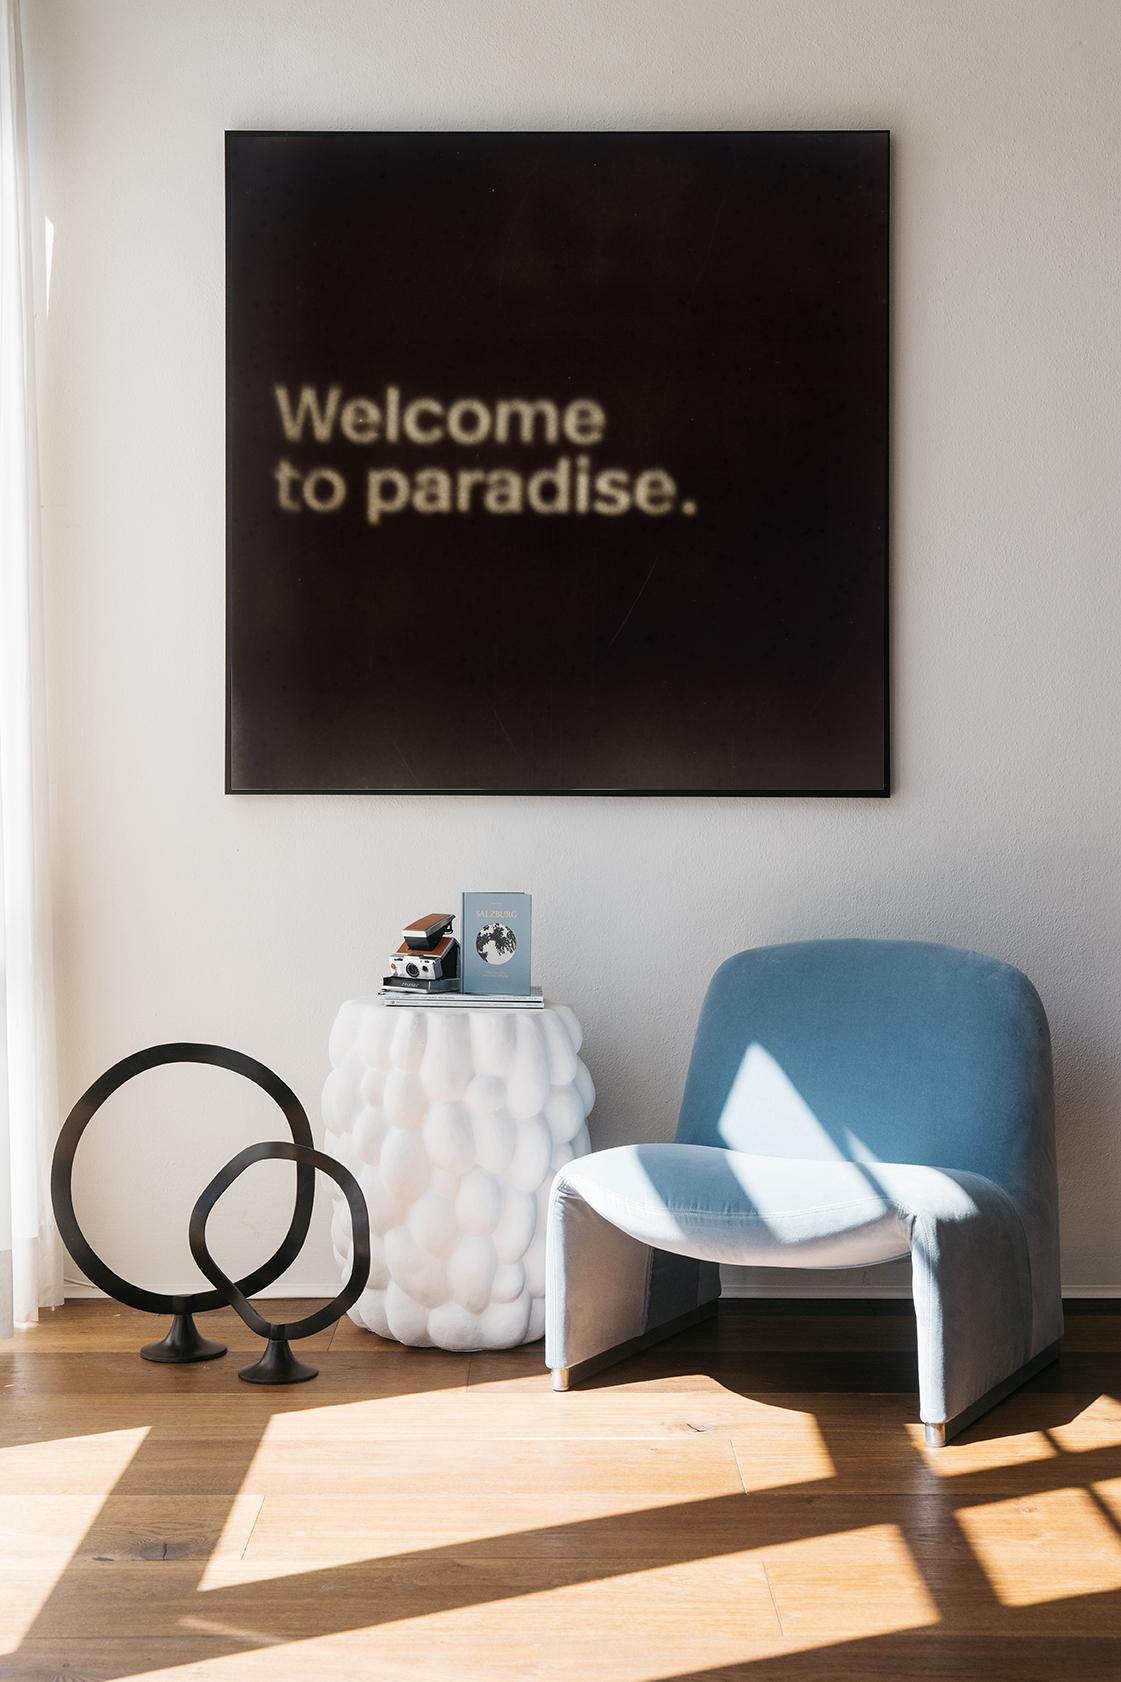 Welcome To Paradise - 21st Century Contemporary Photograph - Black Abstract Print by Pia Clodi